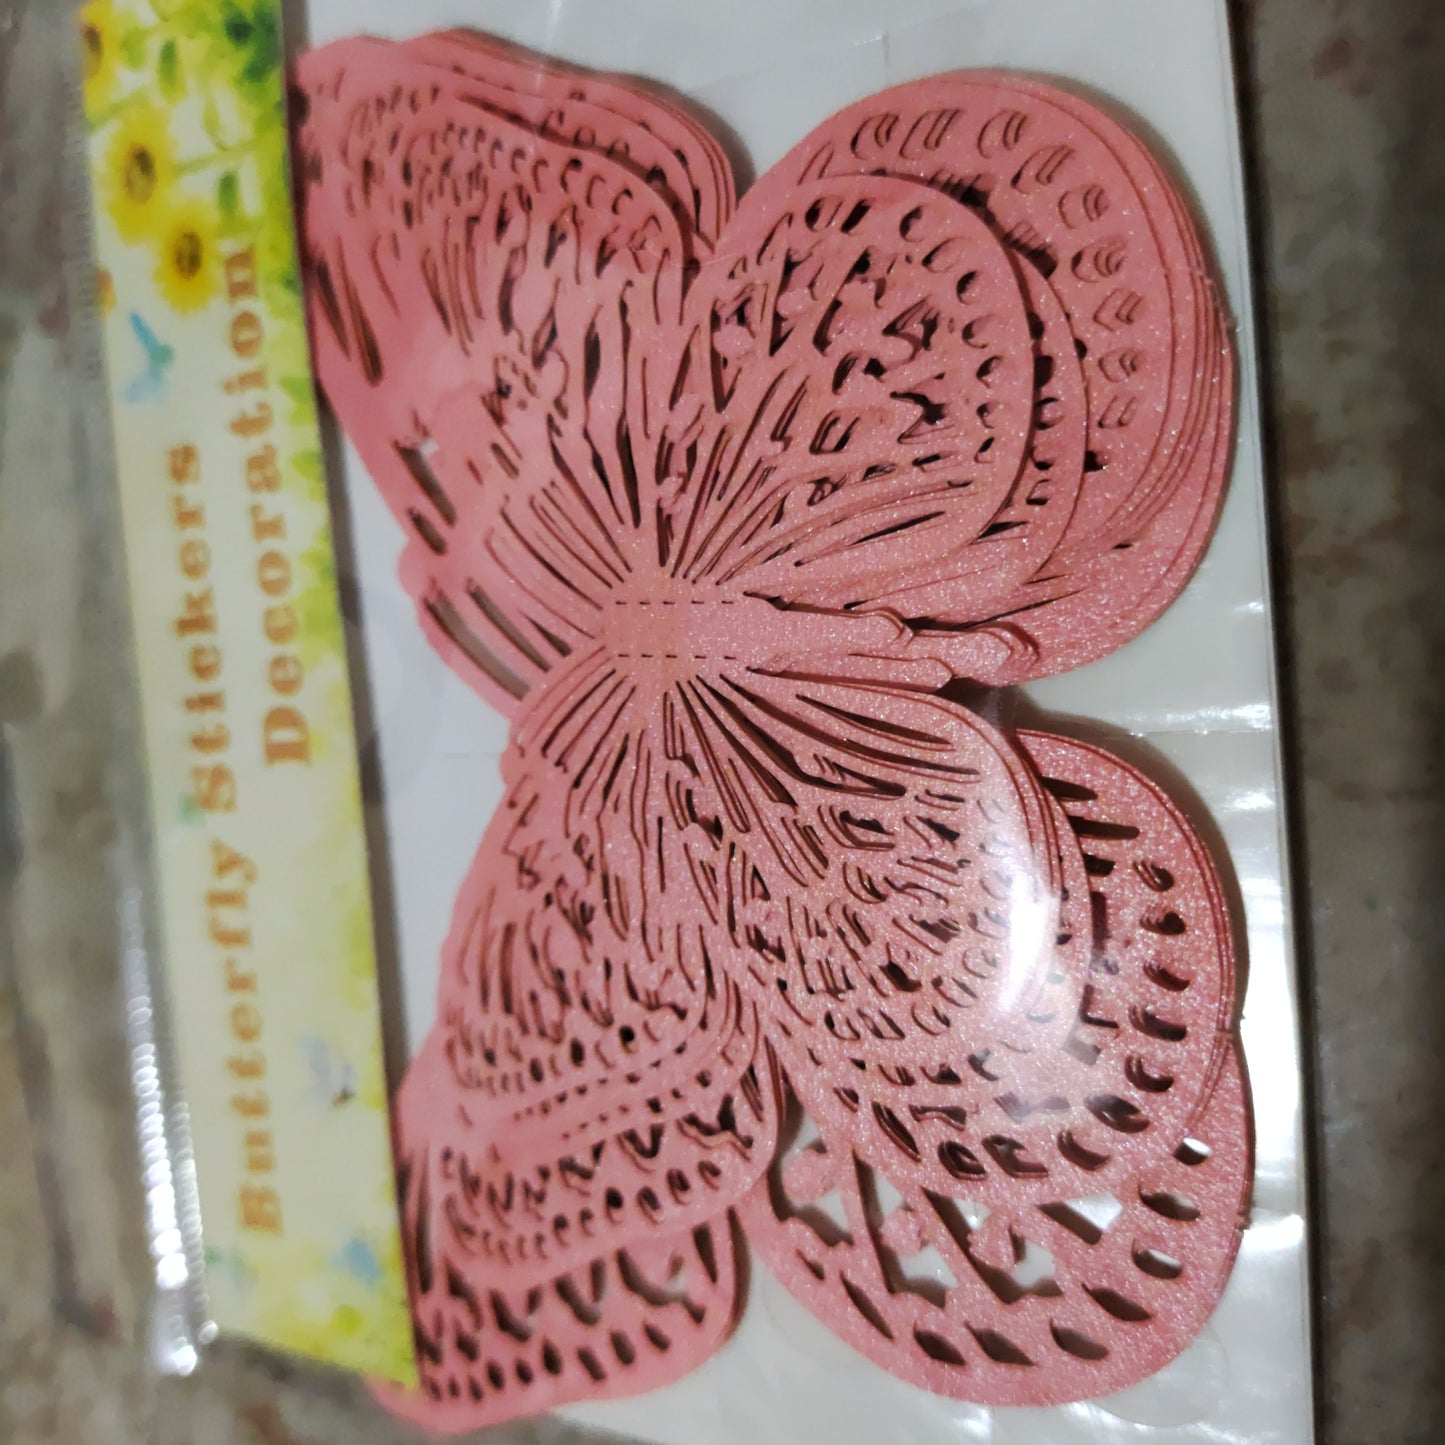 Butterfly decorations - pack of 12 with glue dots